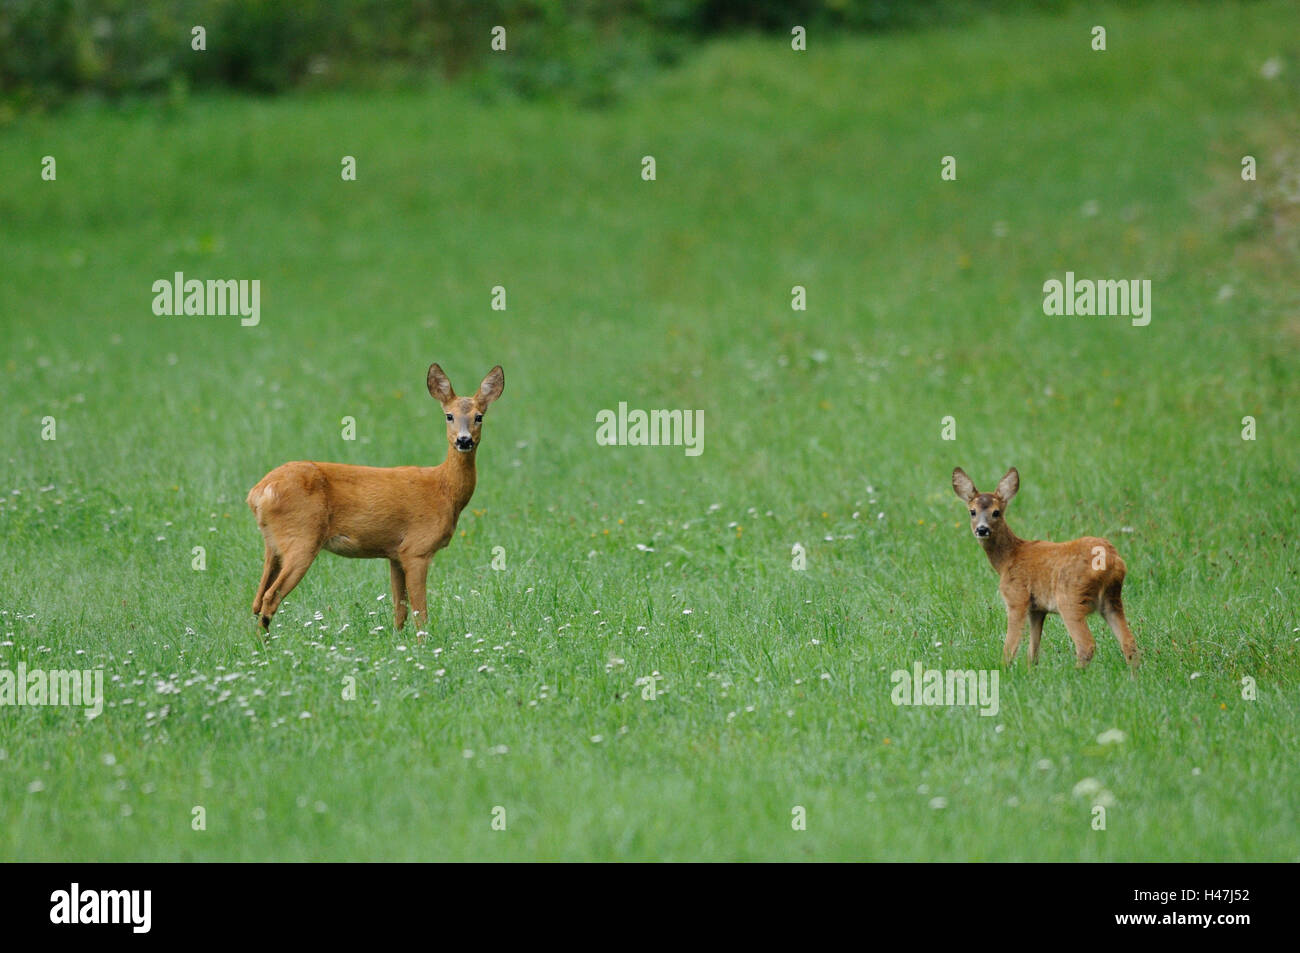 Venisons, Capreolus capreolus, nut with Kitz, meadow, side view, stand, view in the camera, focus on the foreground, Stock Photo